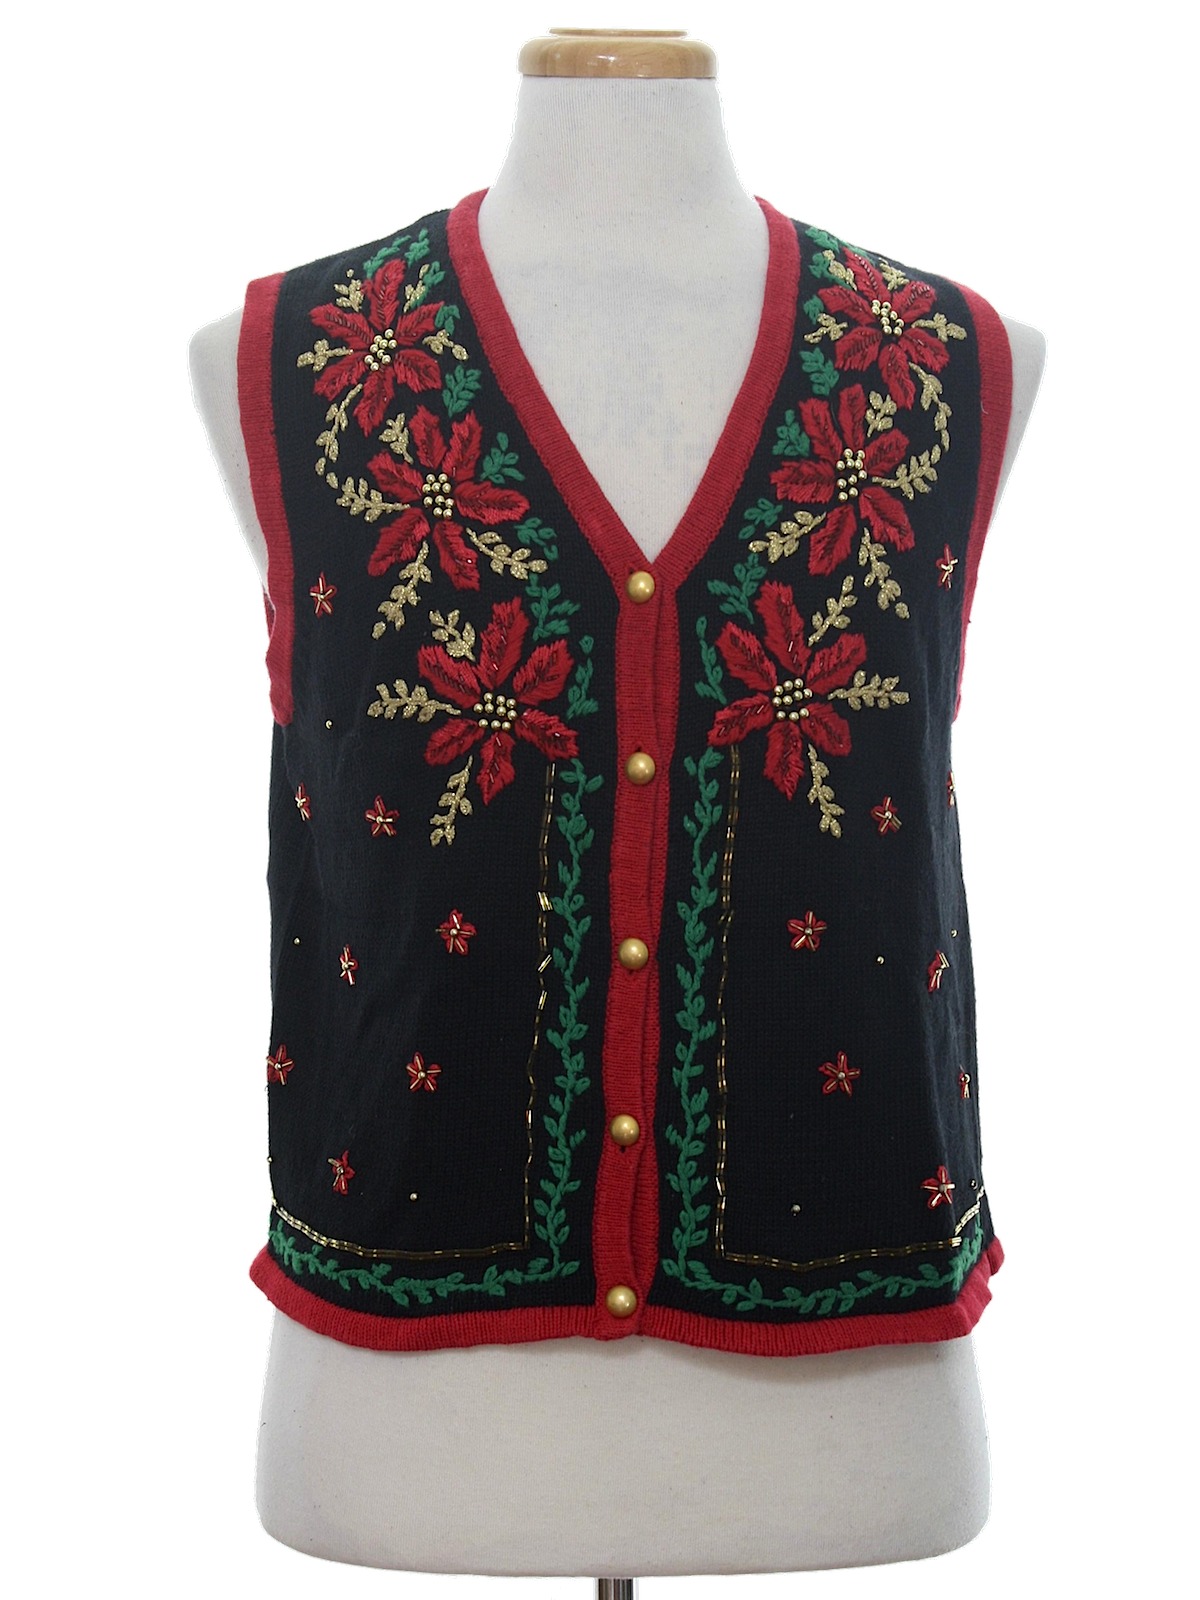 Womens Ugly Christmas Sweater Vest: -Kathie Lee Collection- Womens ...